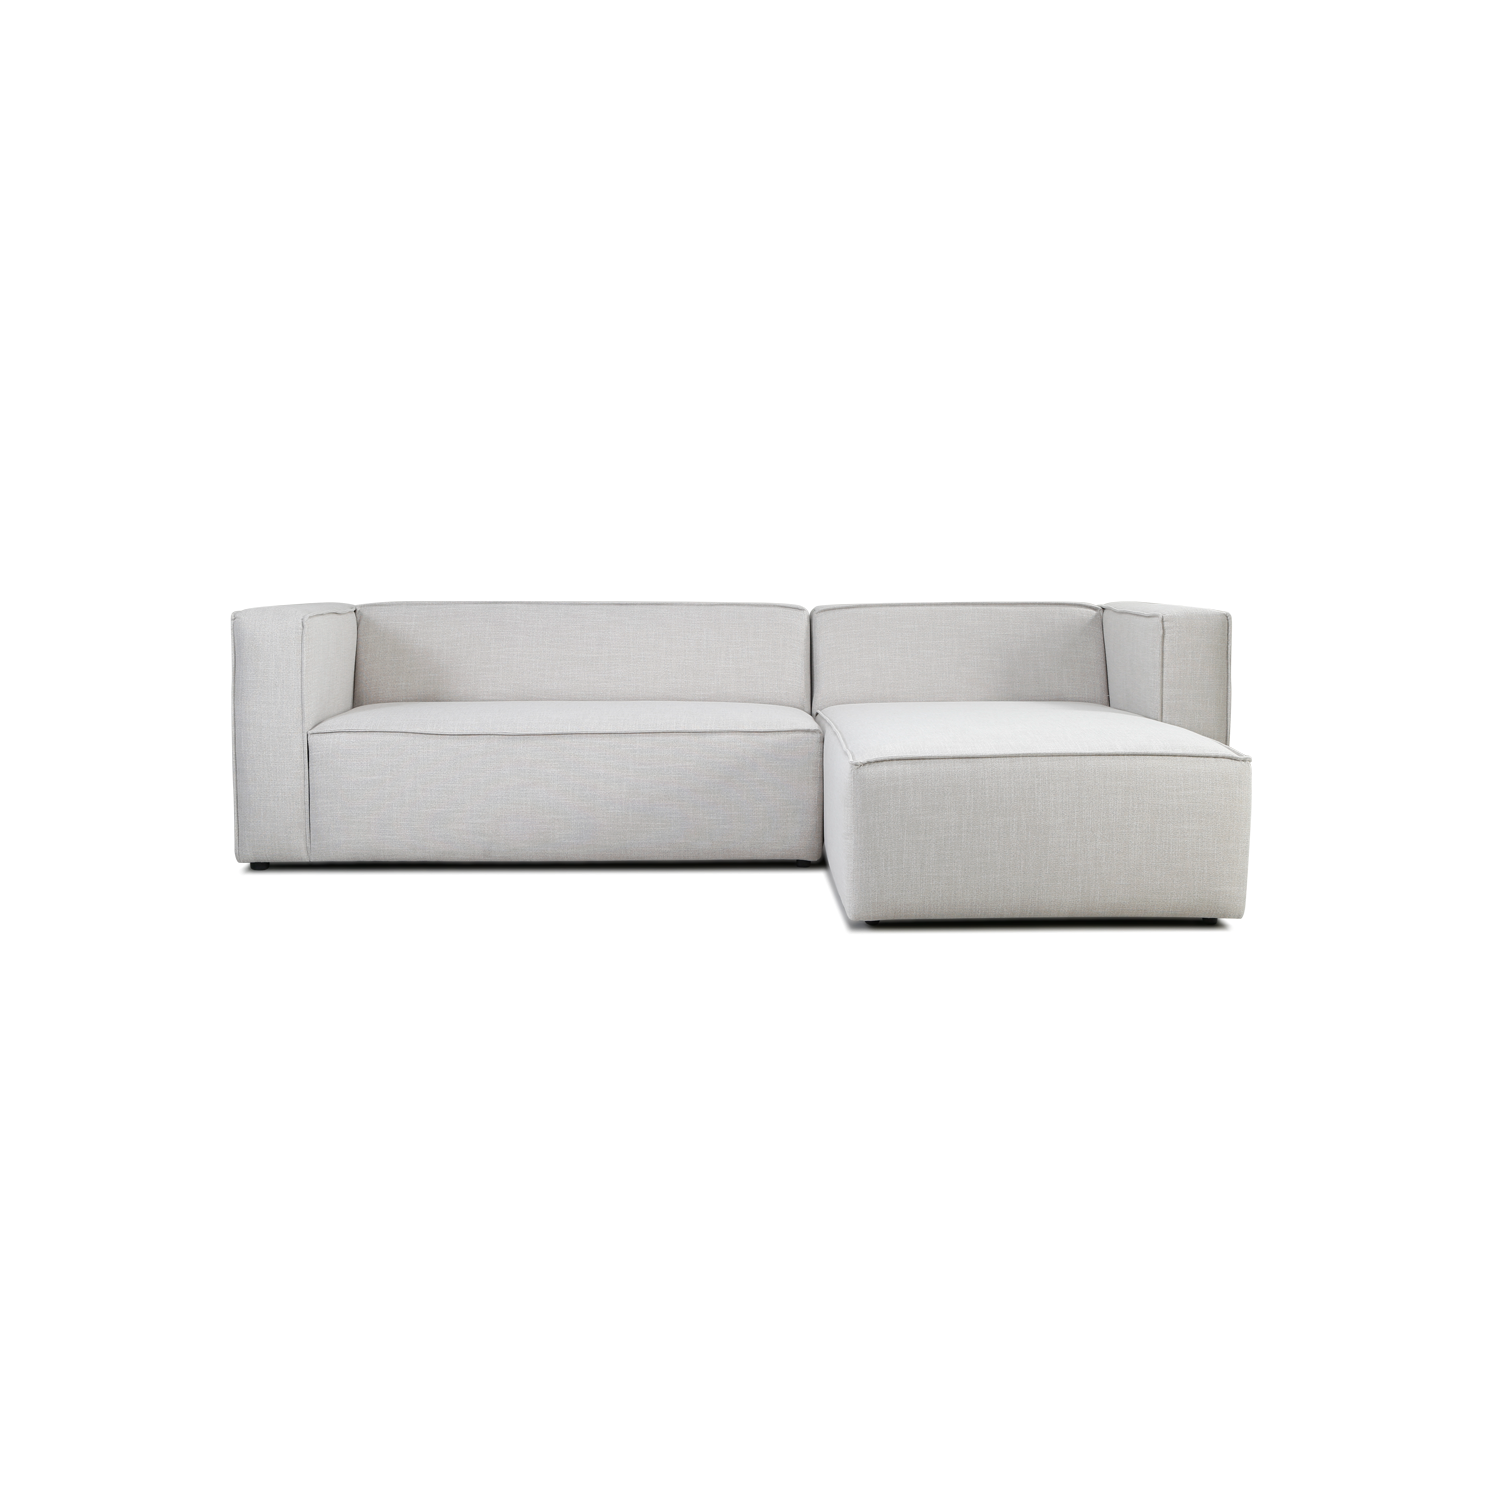 Medium: 2 Seater + Daybed [Right]